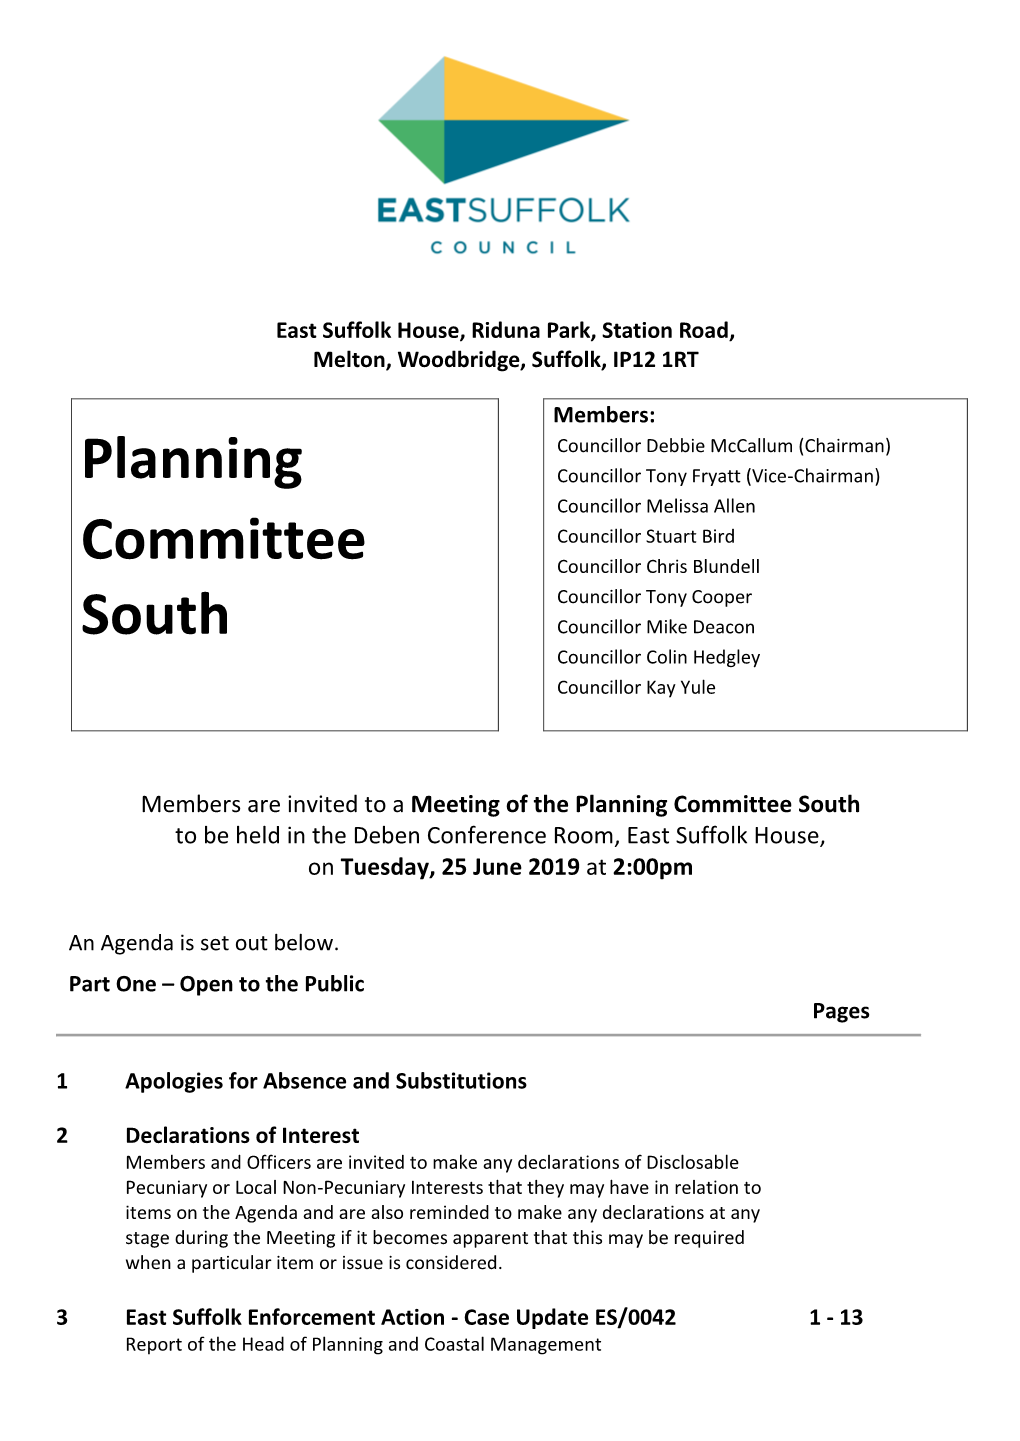 Planning Committee South to Be Held in the Deben Conference Room, East Suffolk House, on Tuesday, 25 June 2019 at 2:00Pm